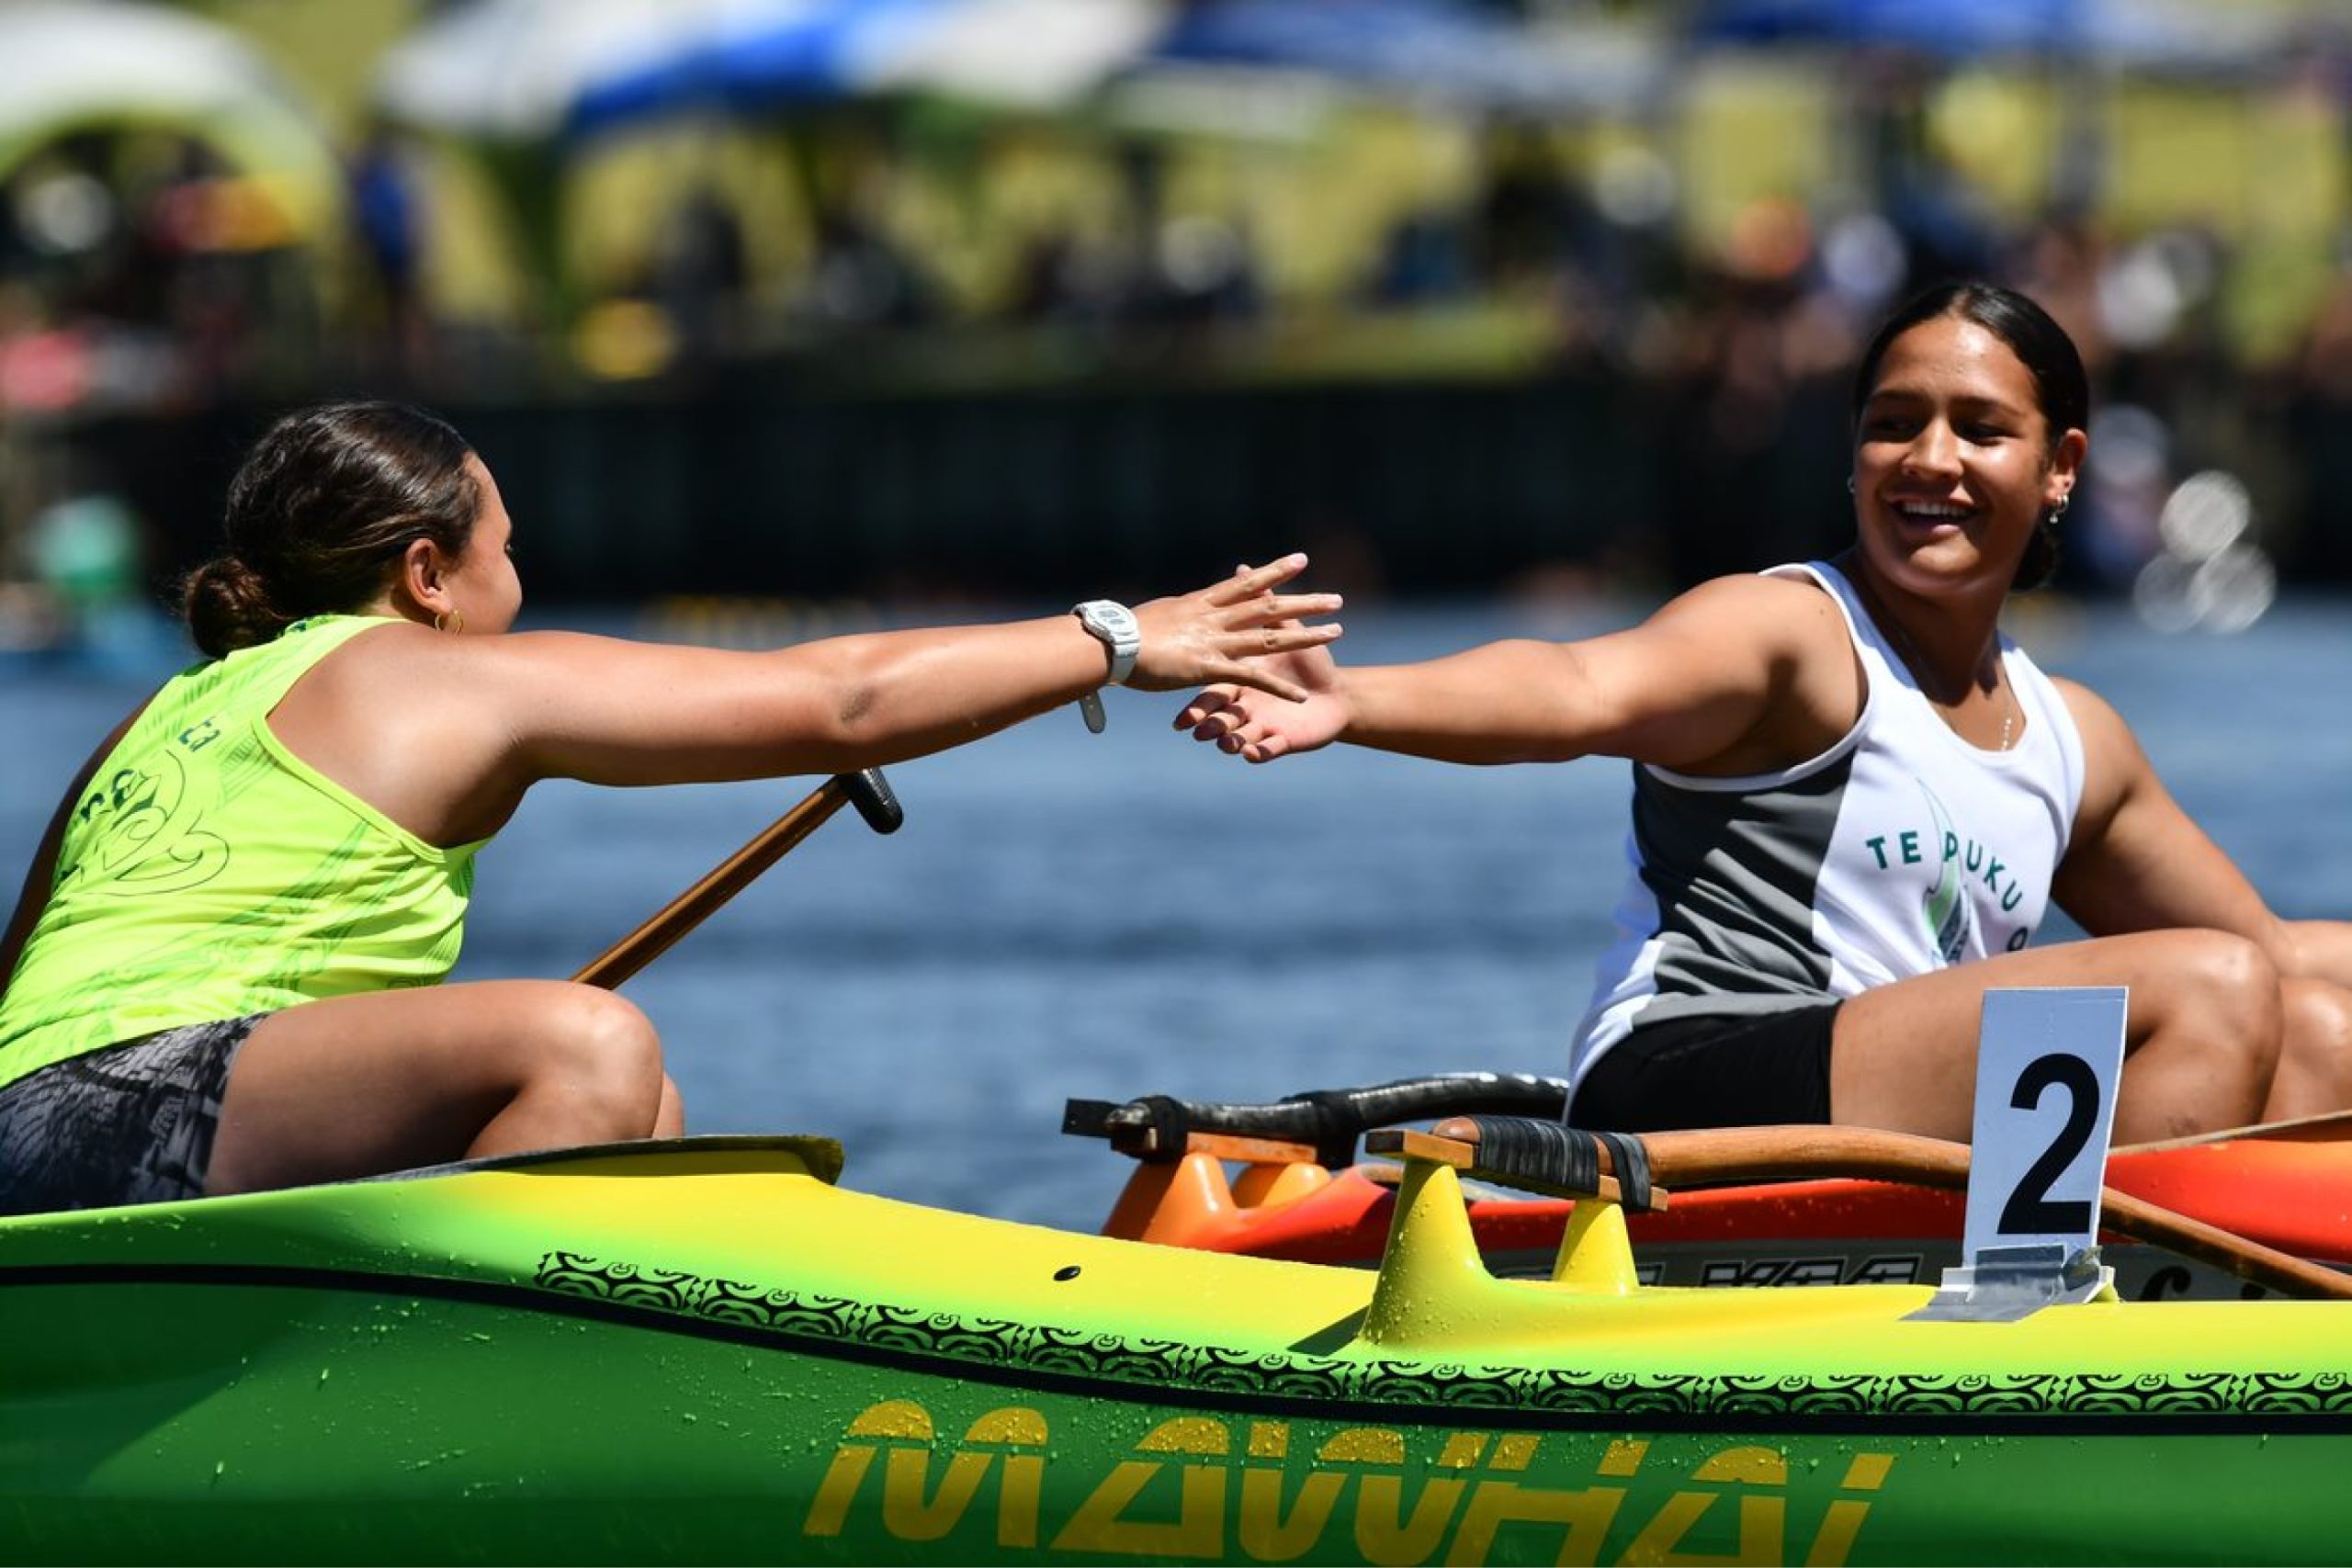 Two young woman reaching out to each other from their waka at a waka ama event